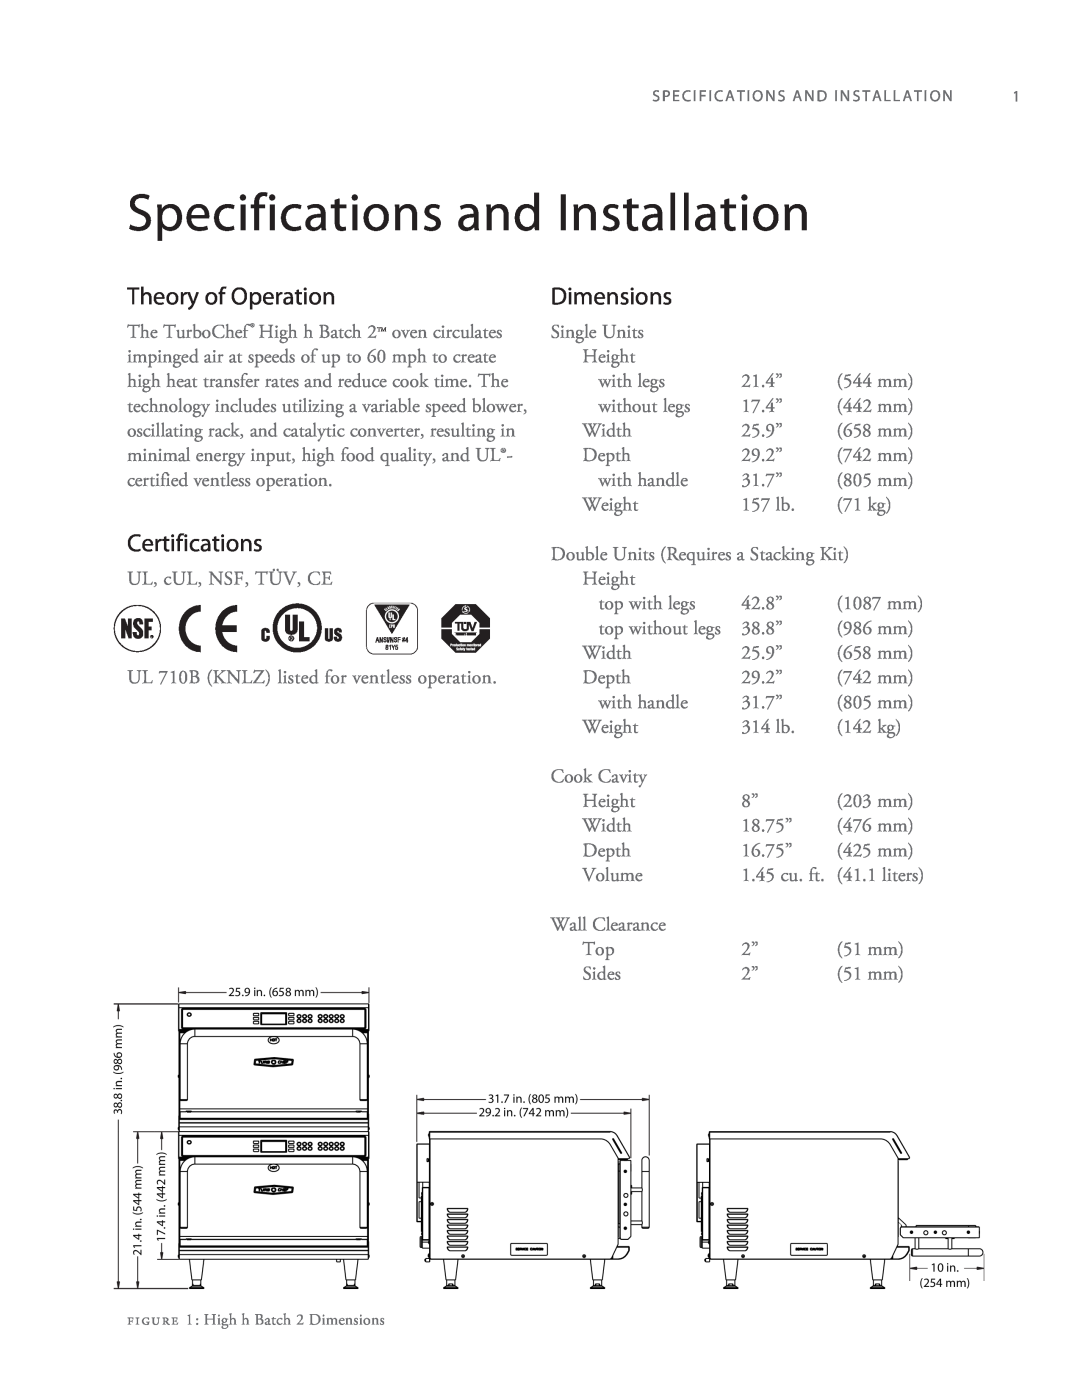 Turbo Chef Technologies 2TM manual Specifications and Installation, Certifications, Theory of Operation, Dimensions 